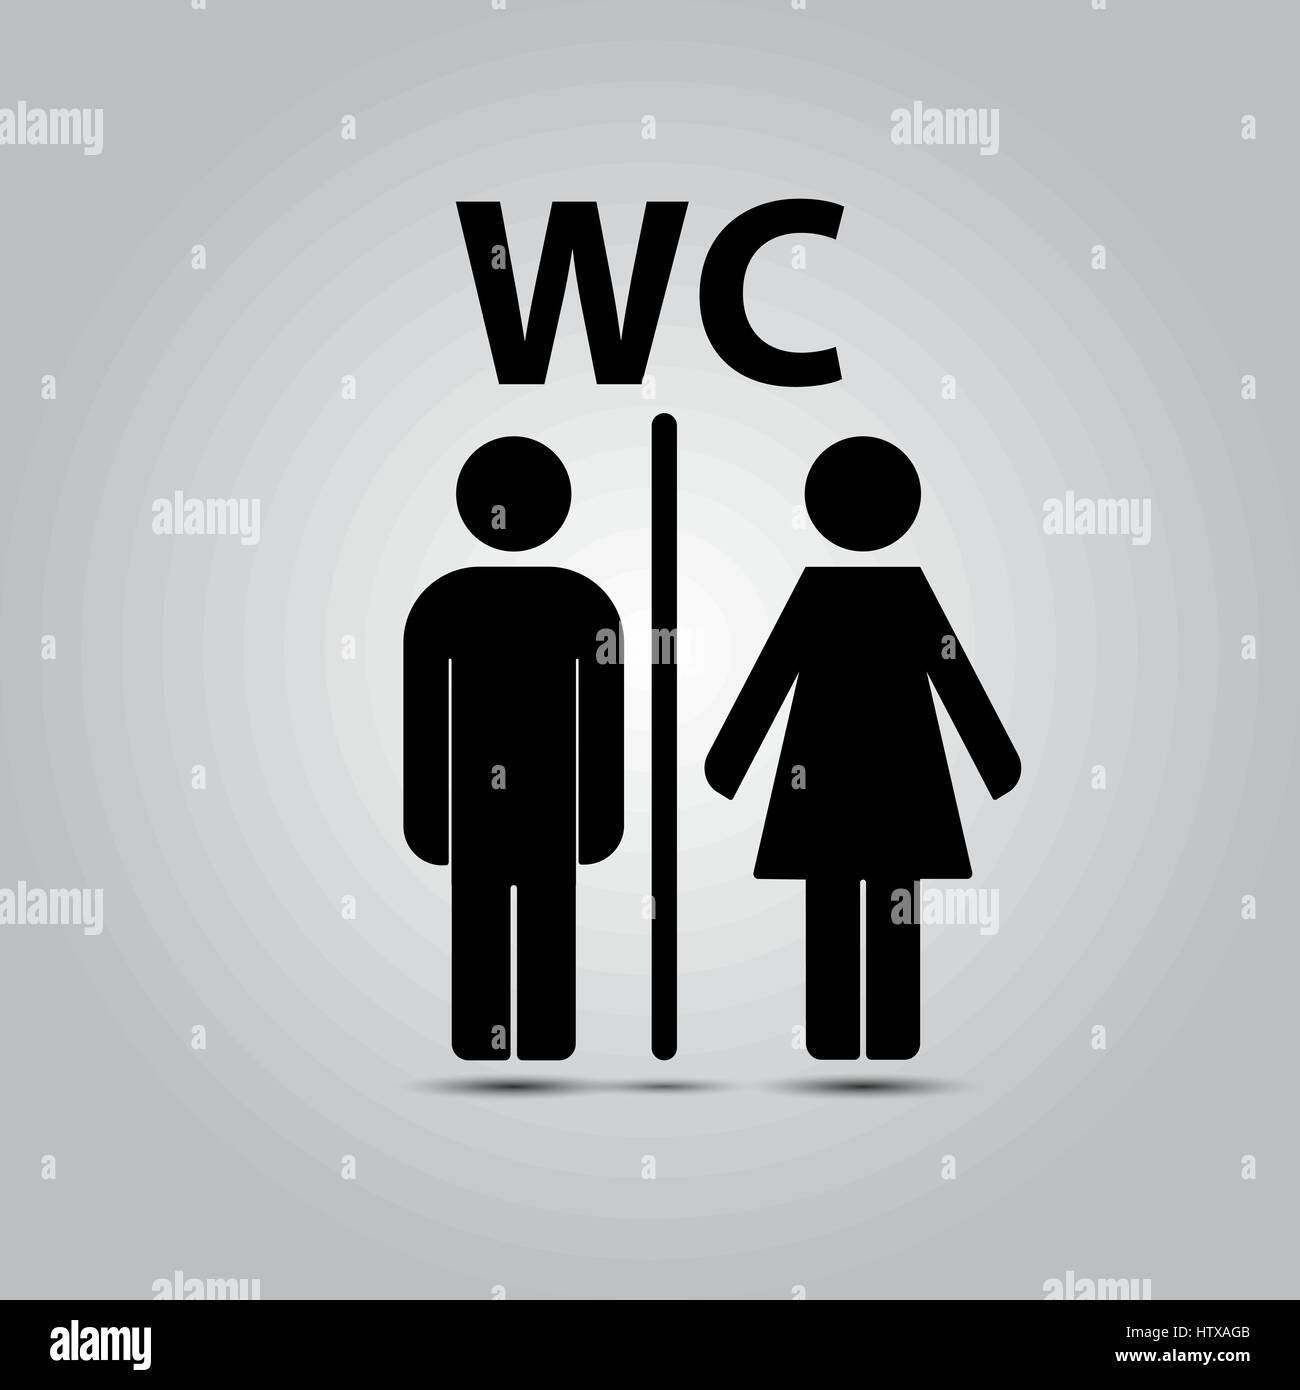 WC toilet icon vector illustration isolated on grey background. Stock Vector